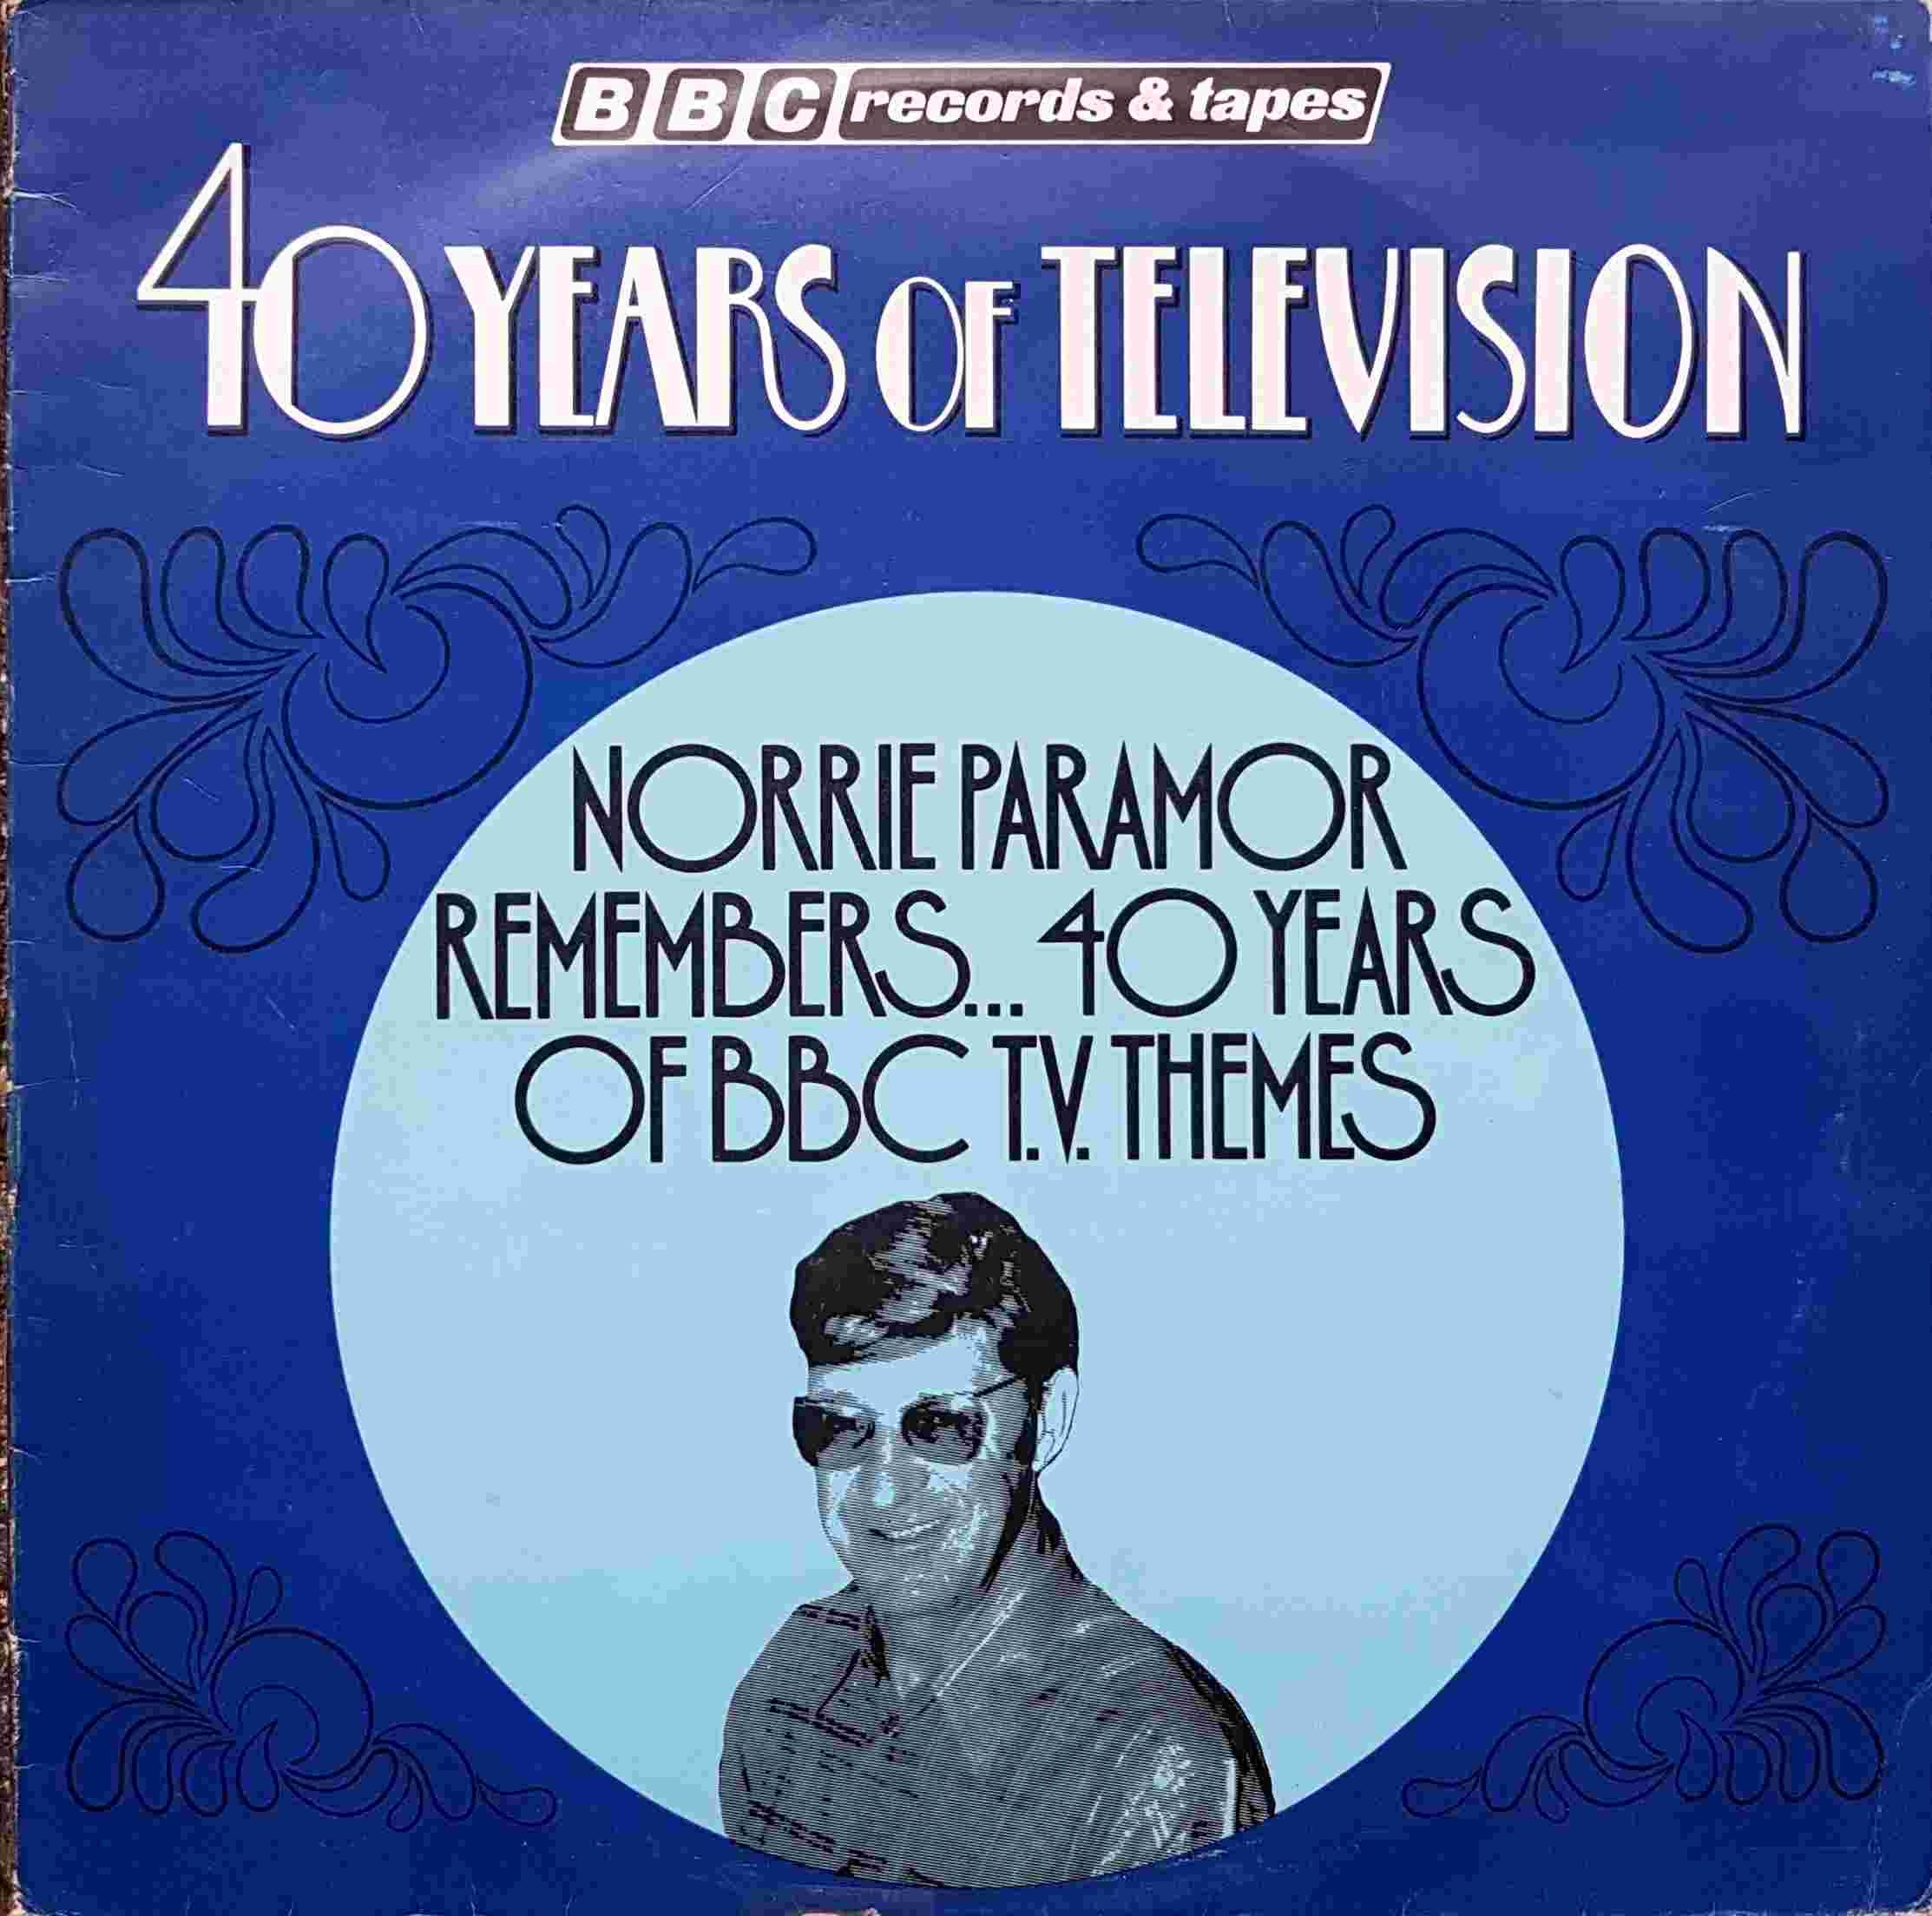 Picture of REB 238 Norrie Paramor remembers 40 years of BBC themes by artist Norrie Paramor from the BBC albums - Records and Tapes library